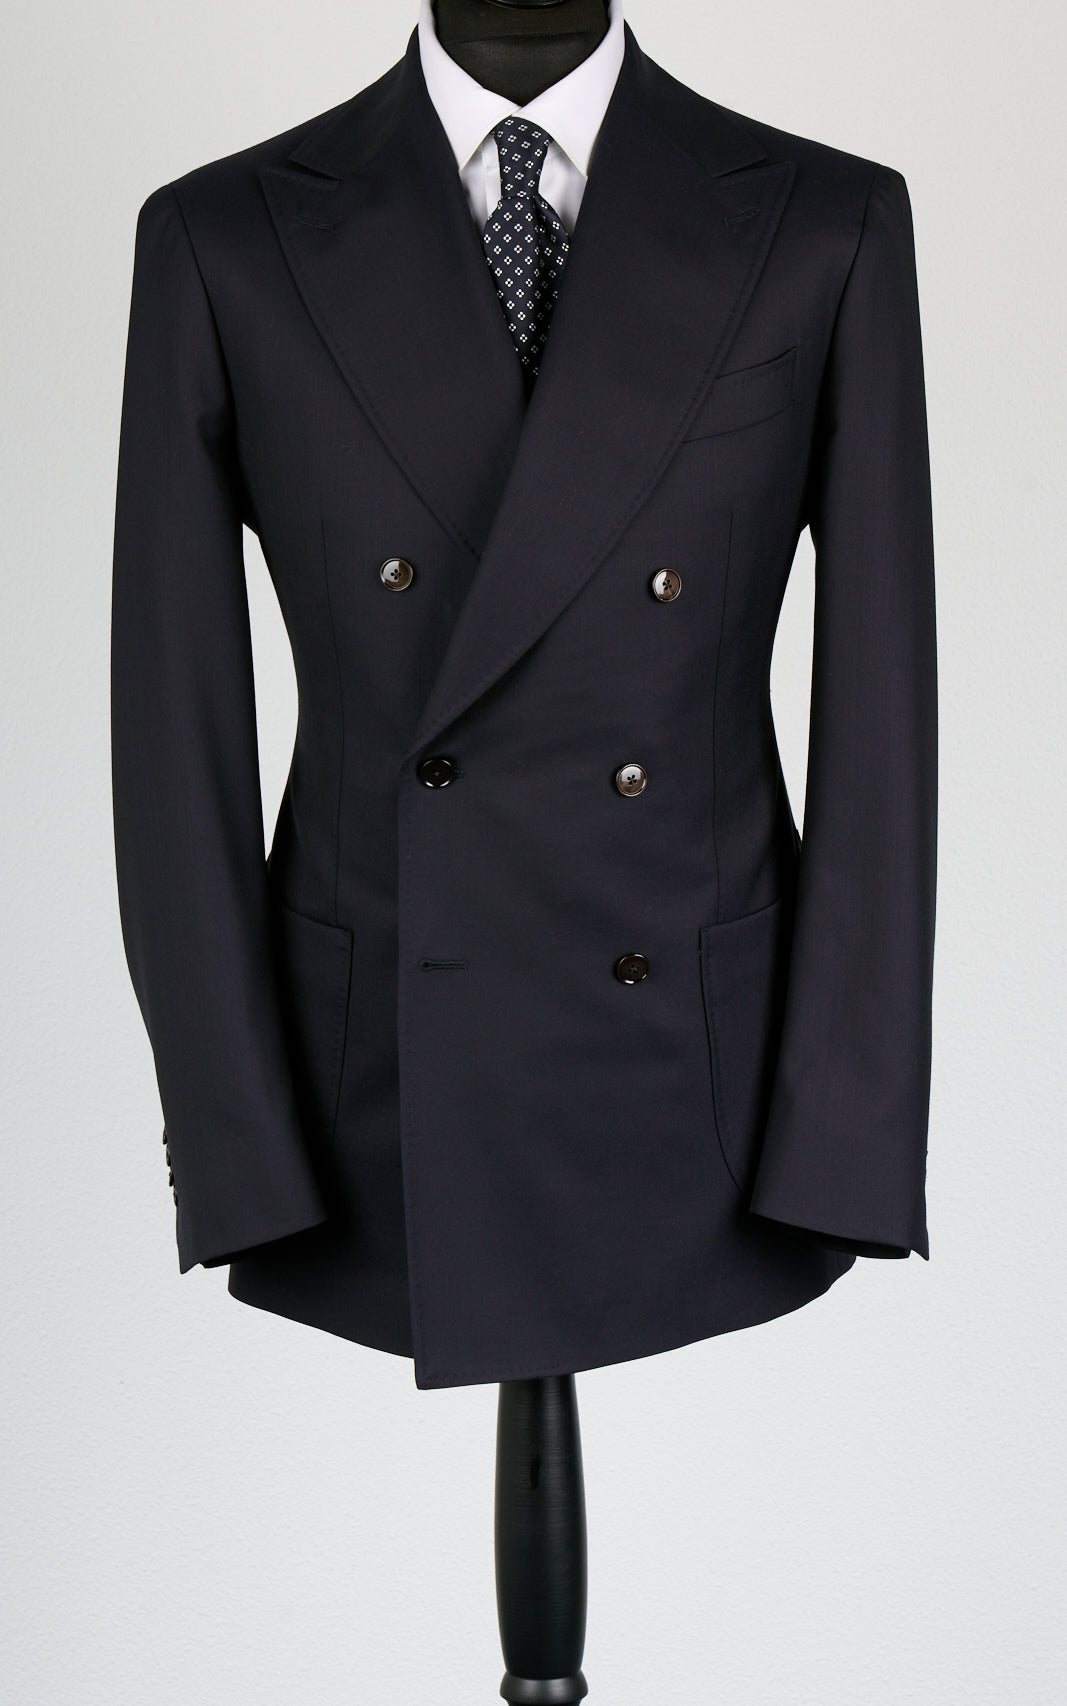 New SUITREVIEW Elmhurst Midnight Navy Pure Wool Traveller Zegna DB Suit - Size 42R (6mm AMF)